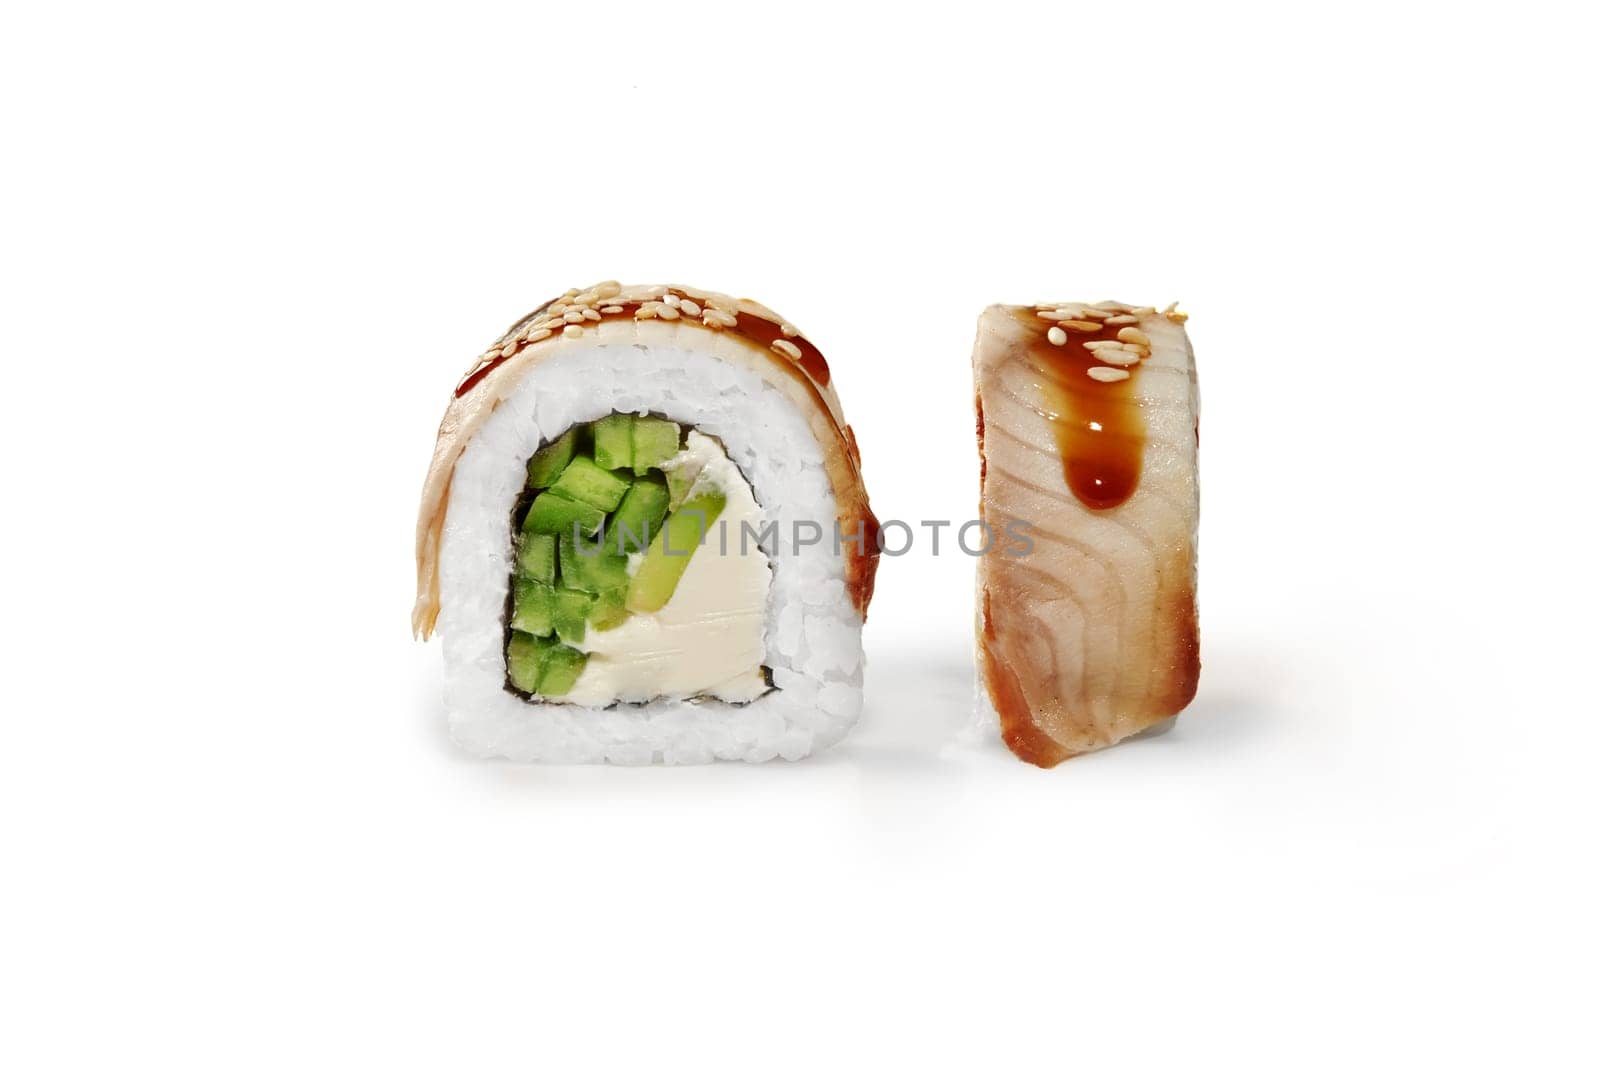 Delicious Philadelphia eel sushi roll filled with soft cream cheese, cucumber and avocado drizzled with sweetish tangy unagi sauce and sesame, isolated on white background. Popular Japanese dish